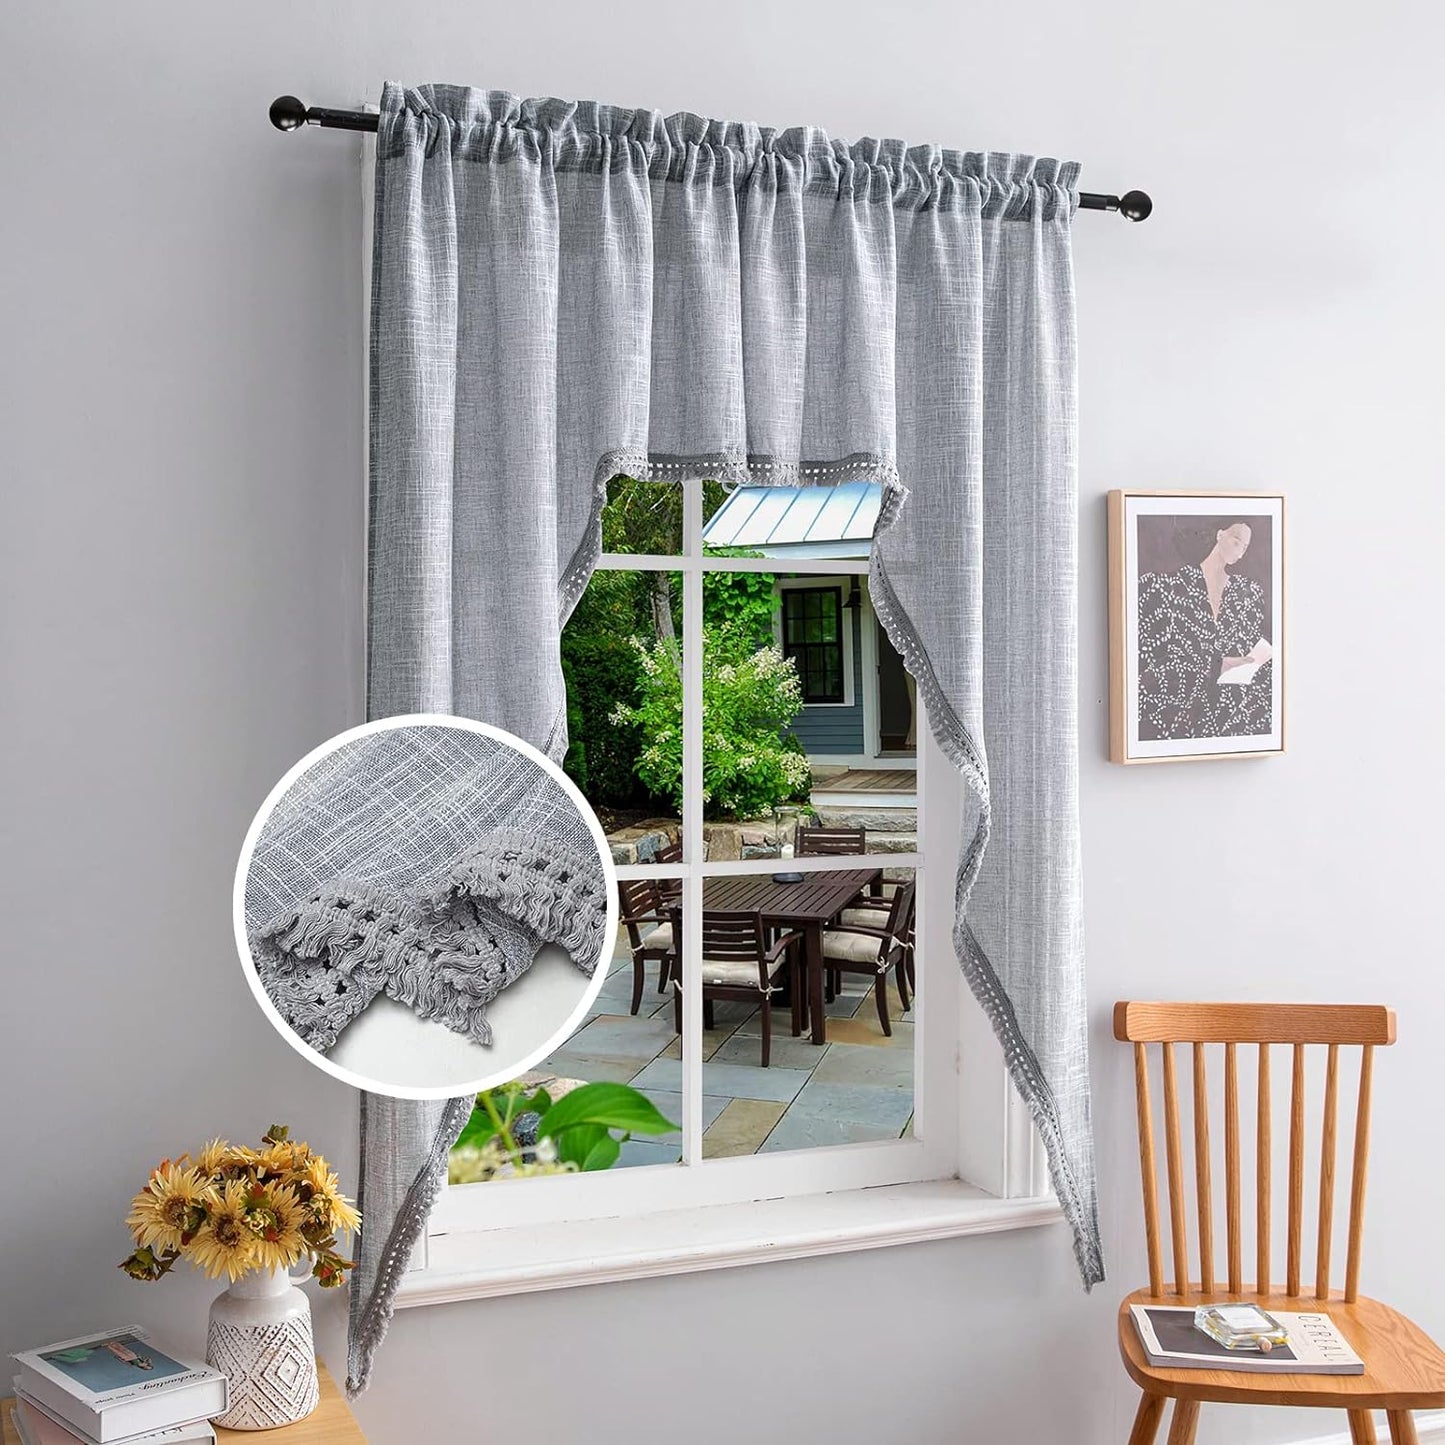 Beda Home Tassel Linen Textured Swag Curtain Valance for Farmhouses’ Kitchen; Light Filtering Rustic Short Swag Topper for Small Windows Bedroom Privacy Added Rod Pocket Design(Nature 36X63-2Pcs)  BD BEDA HOME Grey 36Wx63L - 2 Panels 